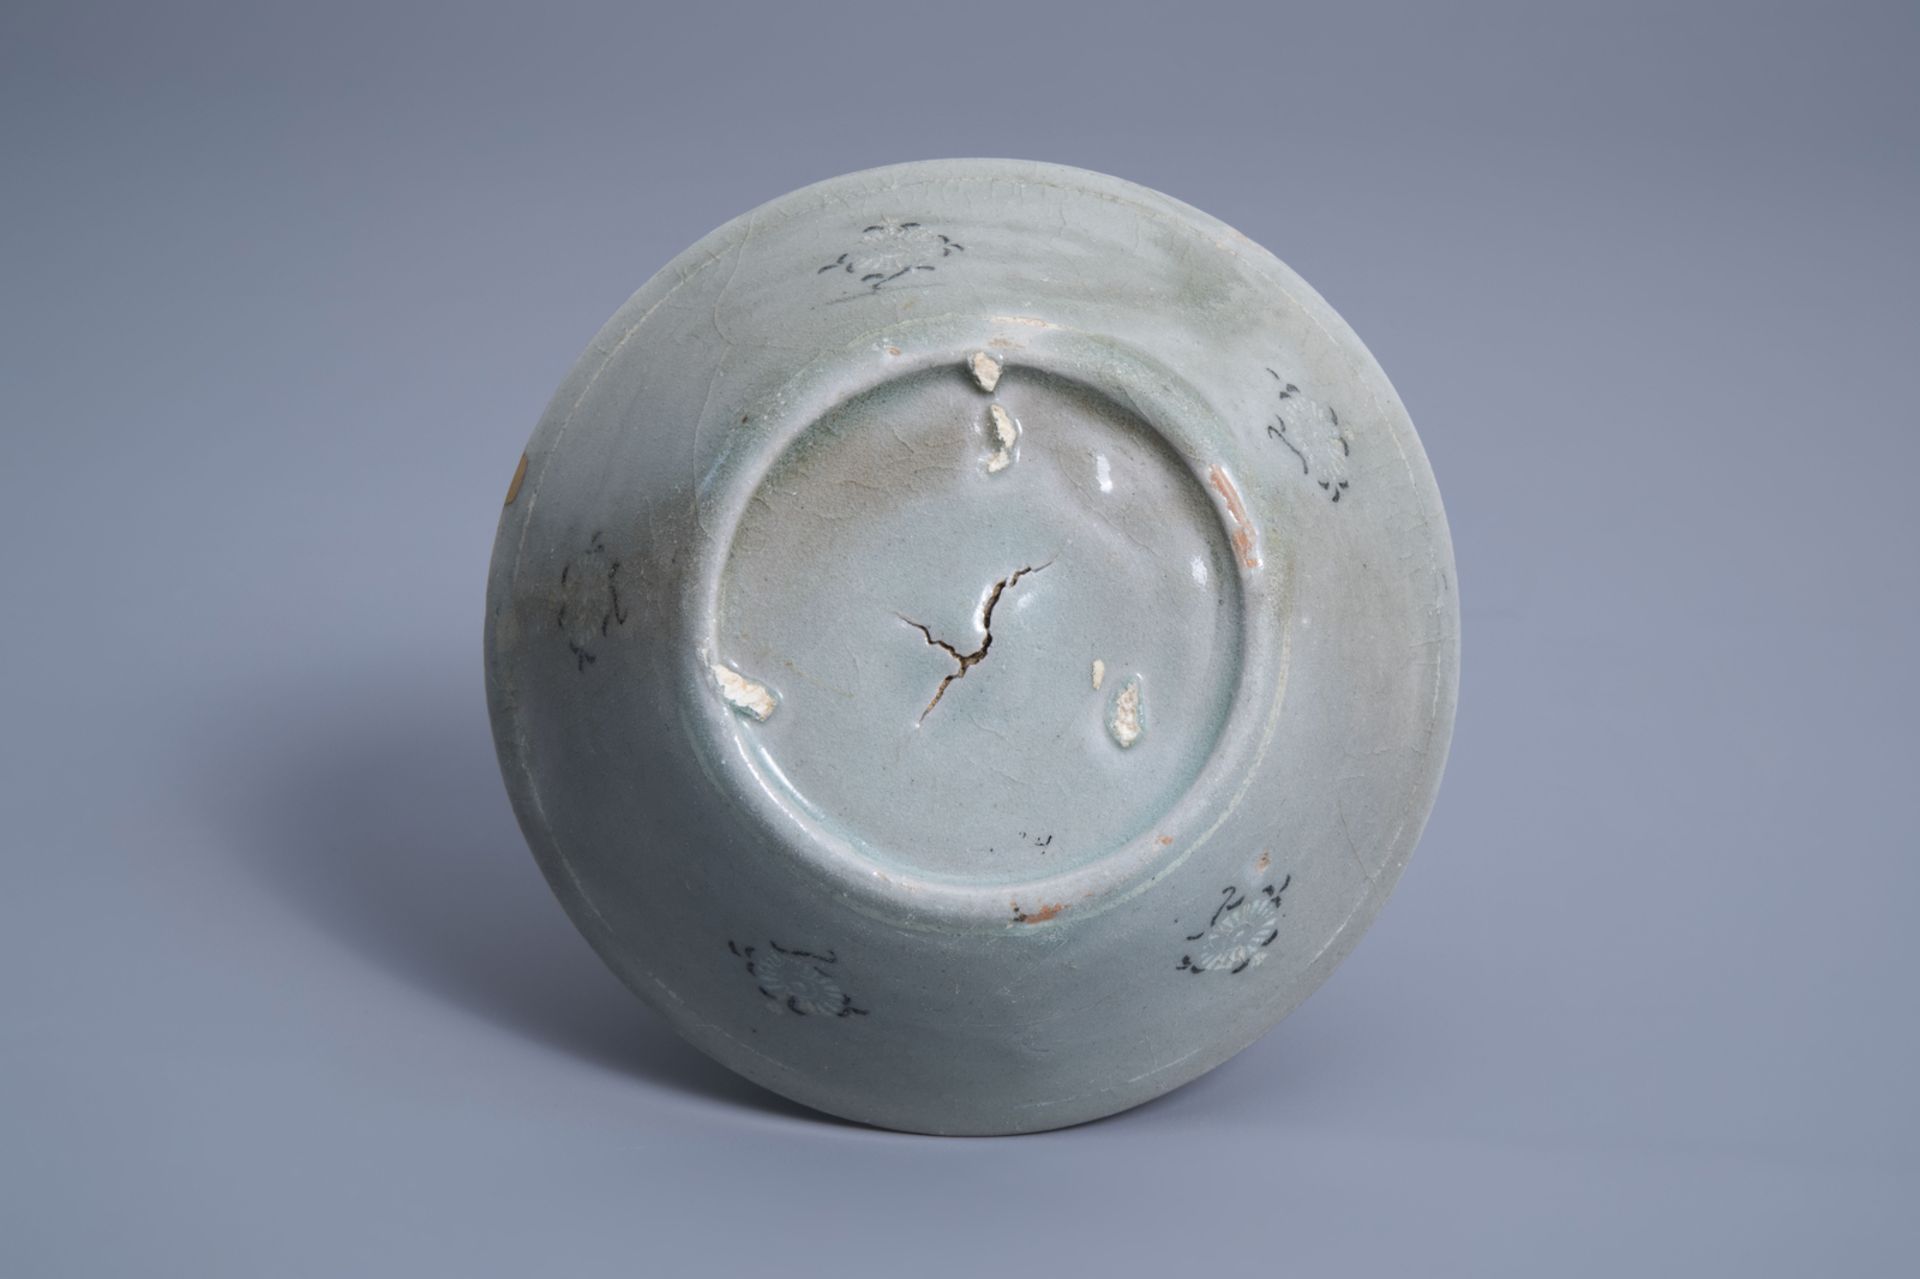 A Korean celadon bowl with ornamental design, probably Goryeo/Joseon, 14th/15th C. - Image 2 of 6